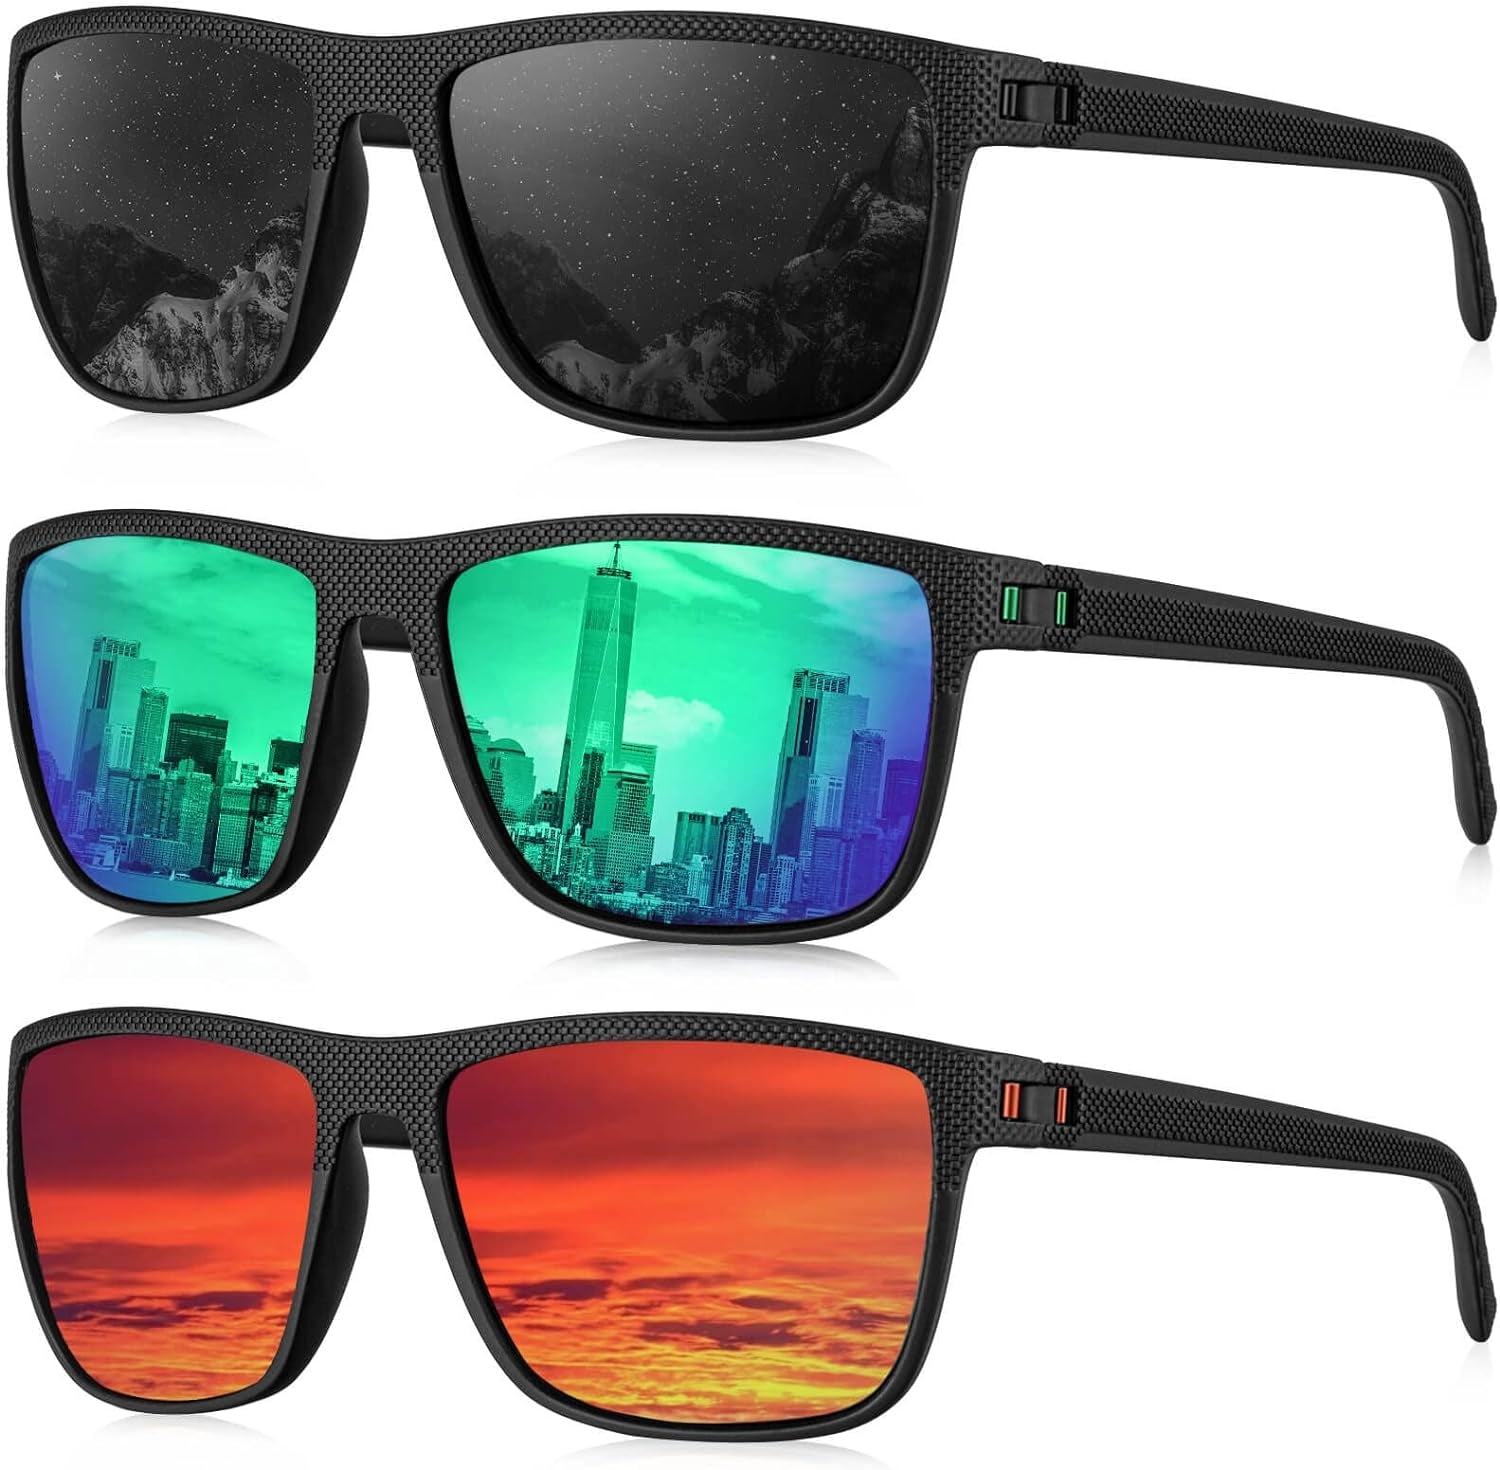 Polarized Sunglasses for Men, Lightweight Sun Glasses with UV Protection for Driving Fishing Golf